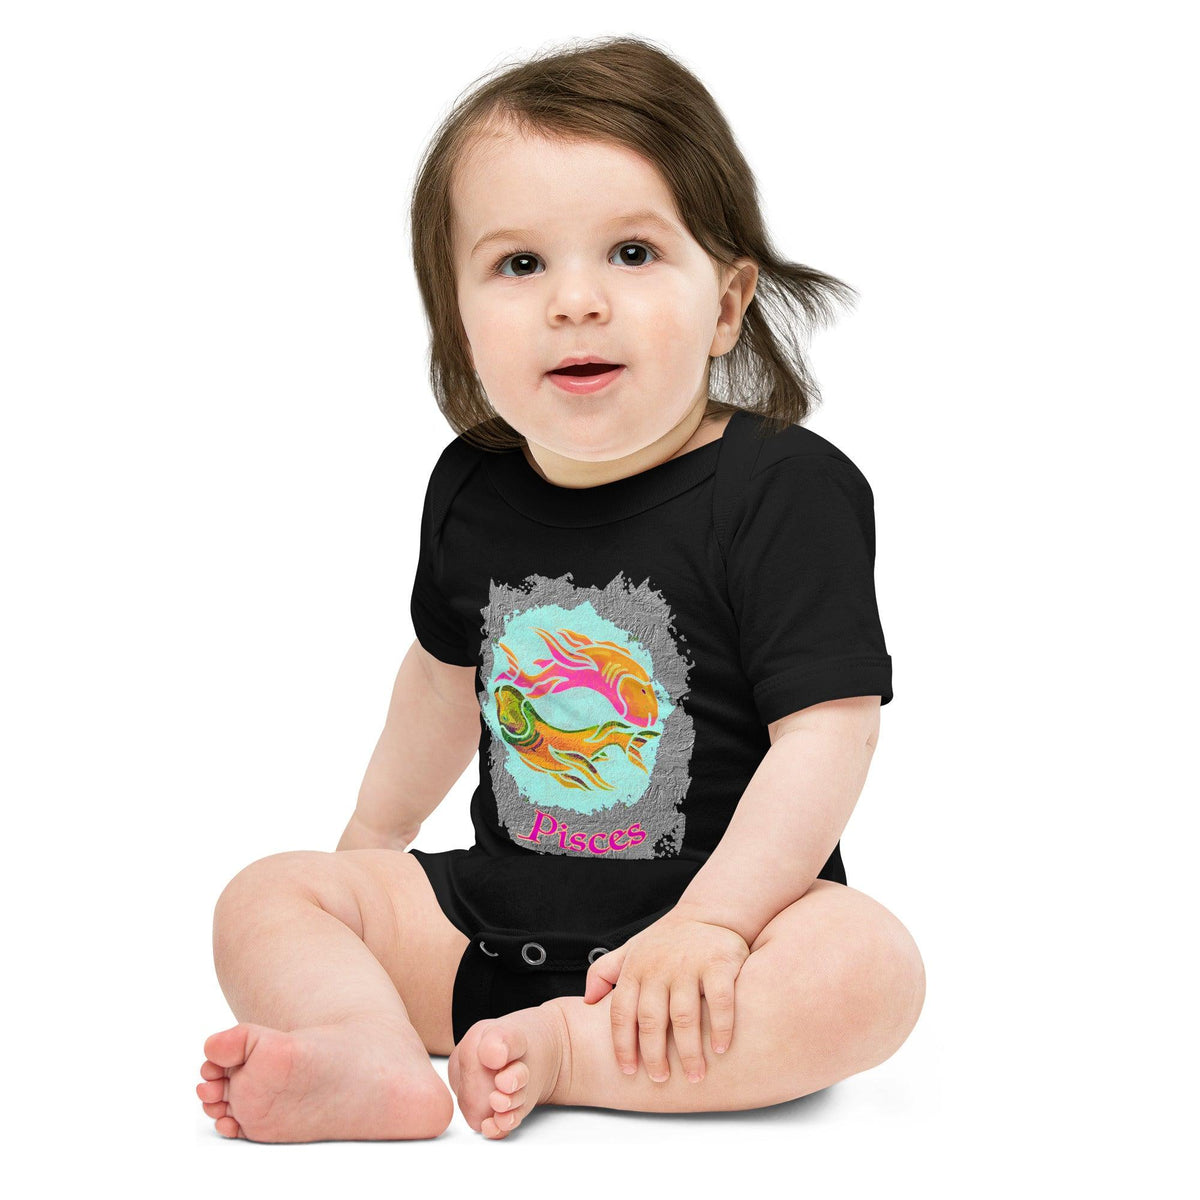 Pisces-themed baby short sleeve one-piece on white background.